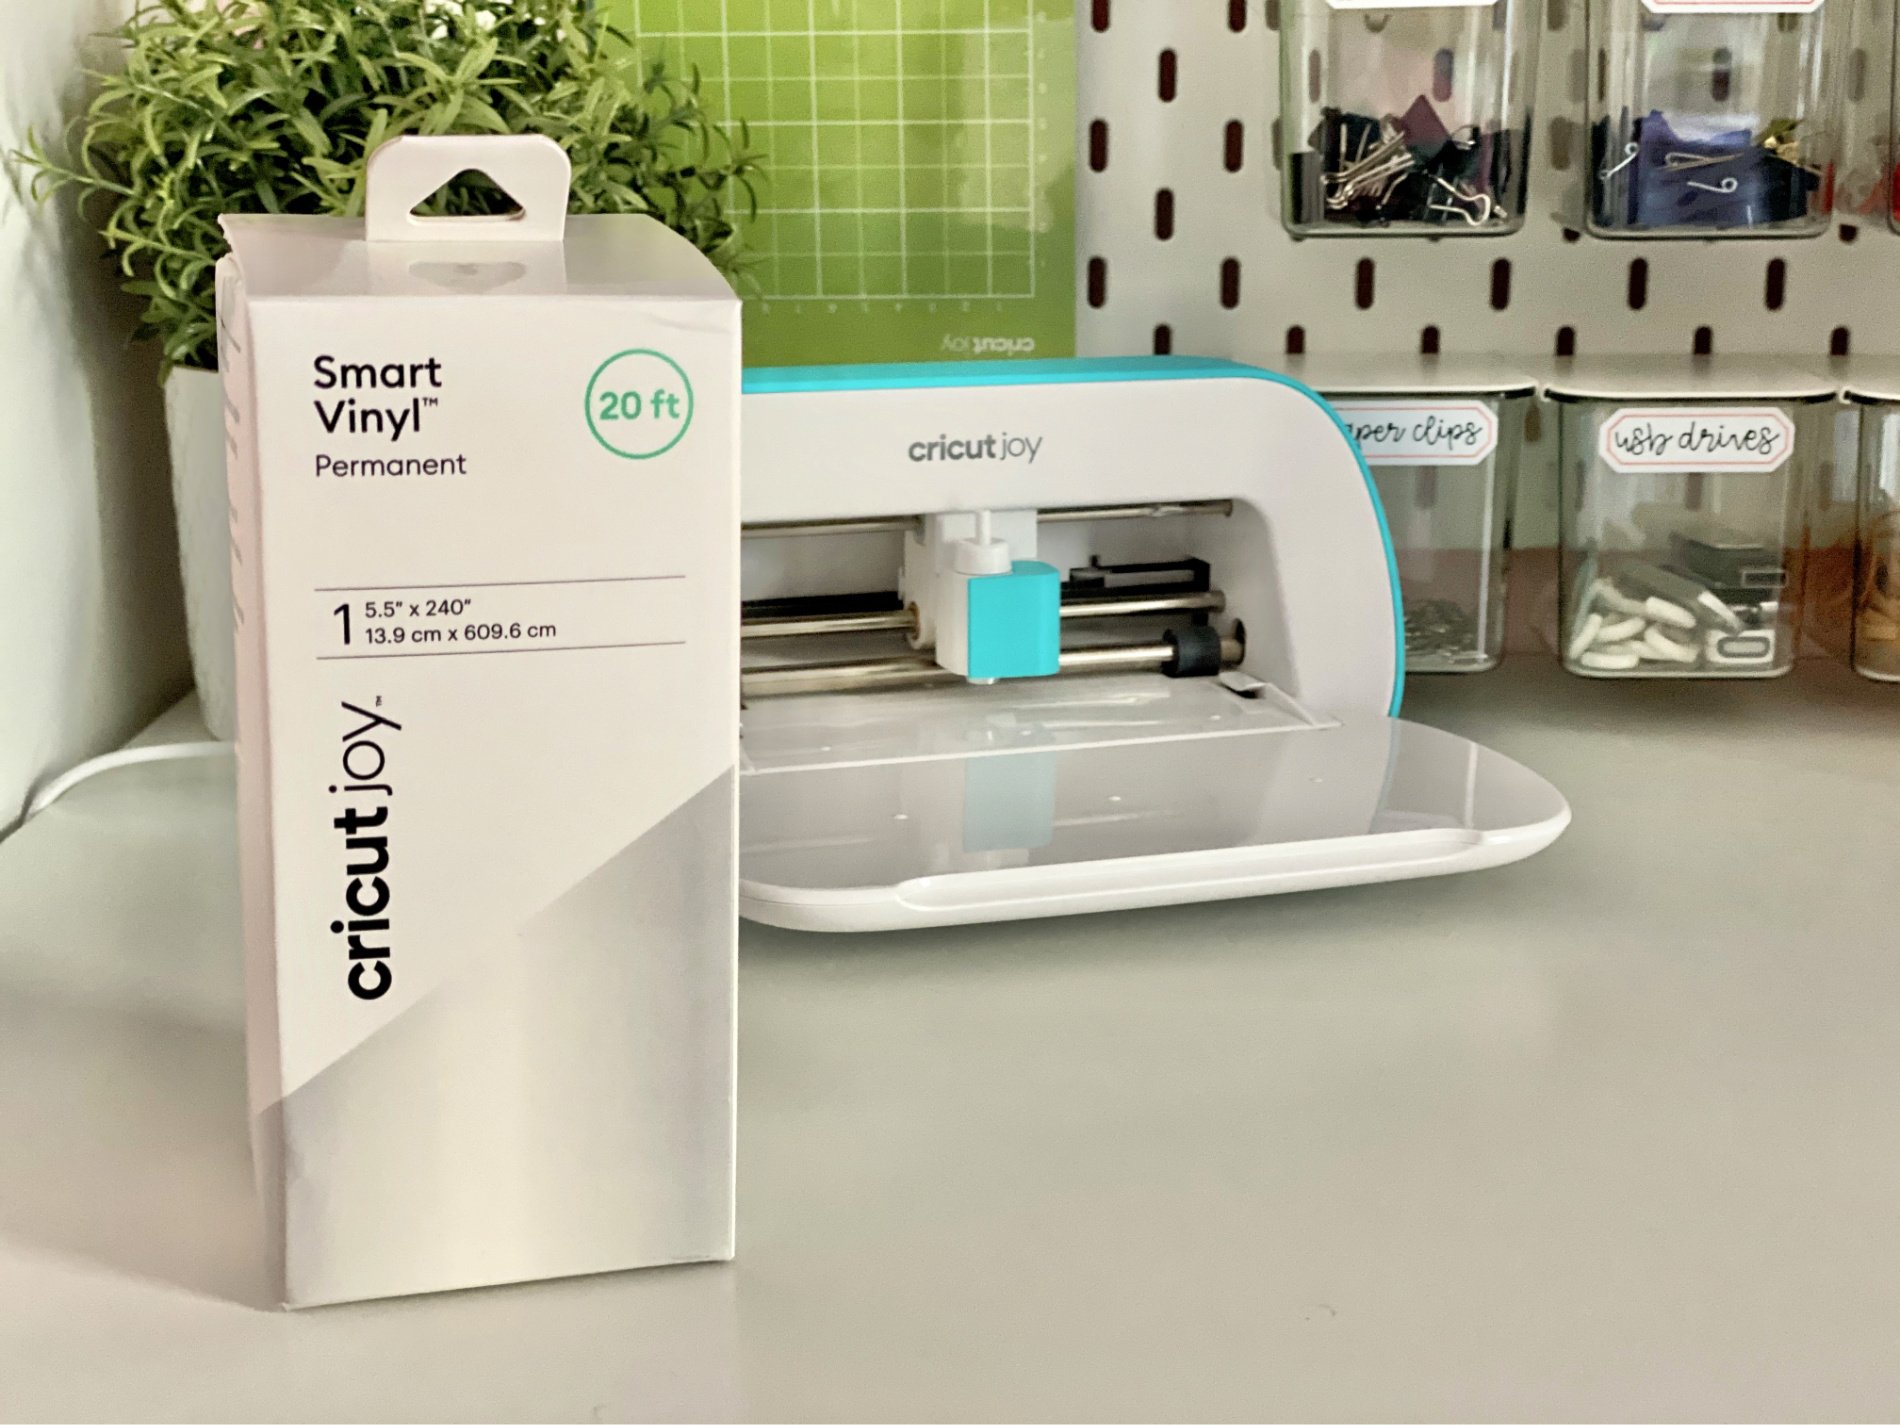 Box of Smart Vinyl standing on a white table with a Cricut Joy machine in the background.